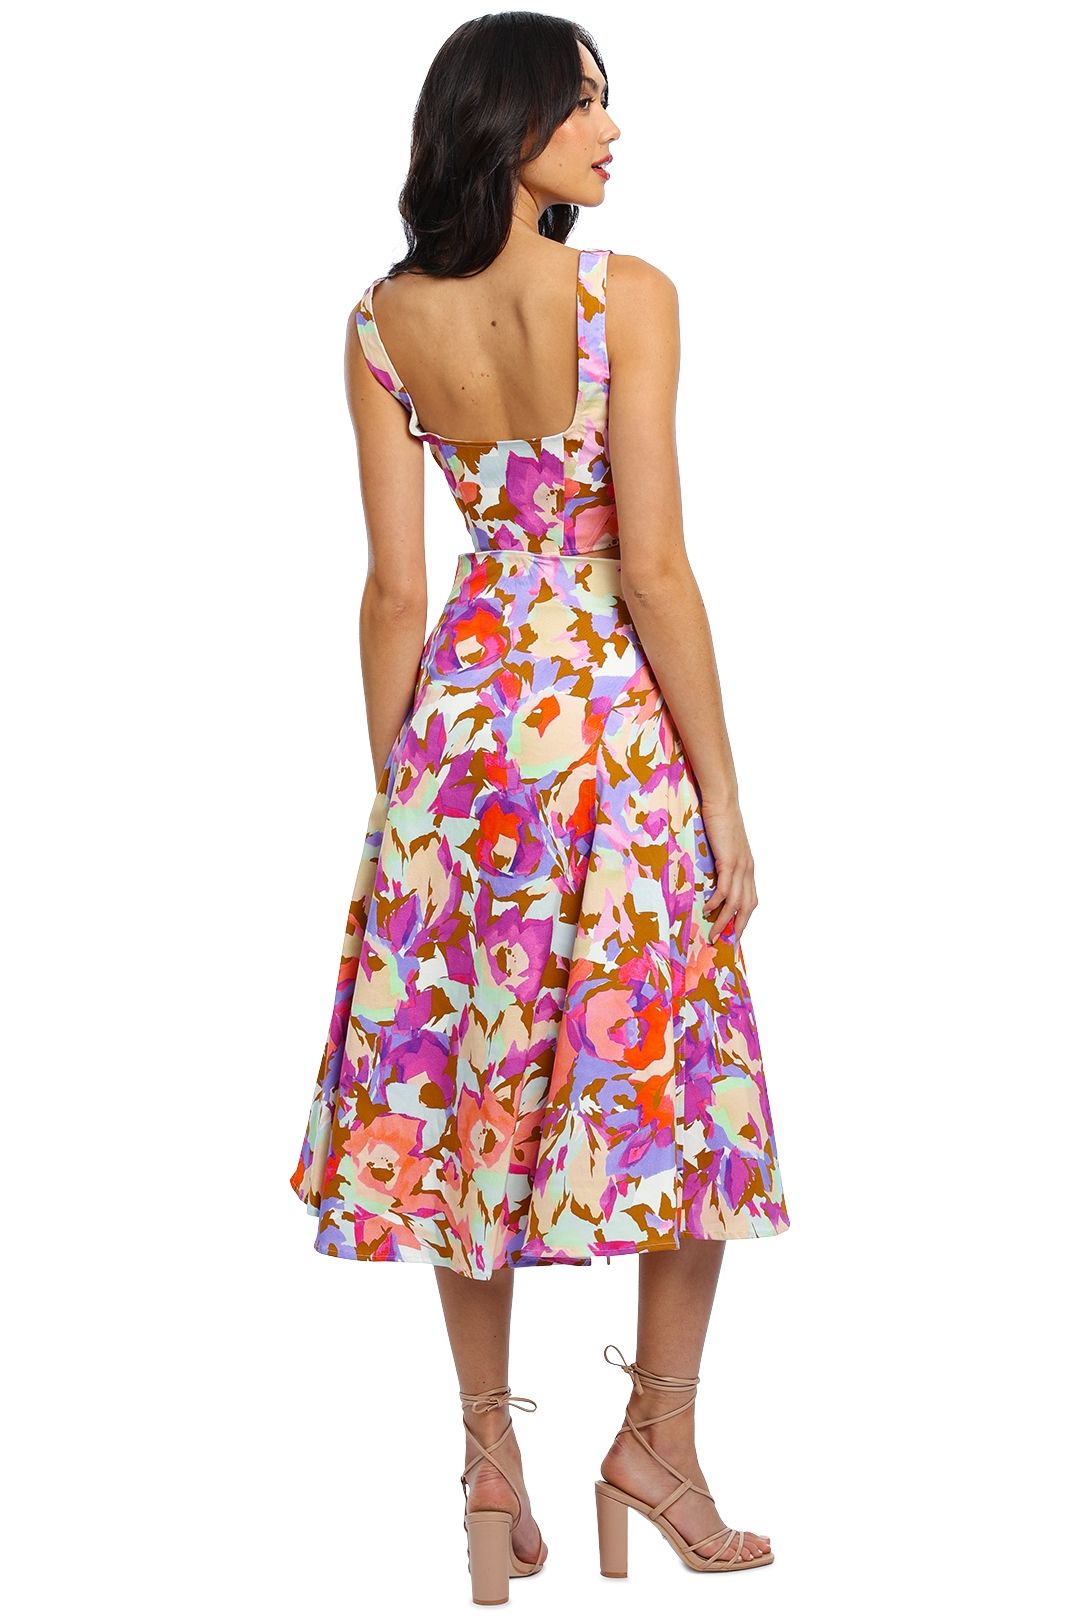 Nicholas Dawn Top and Dasia Skirt Set Abstract Floral Sleeveless